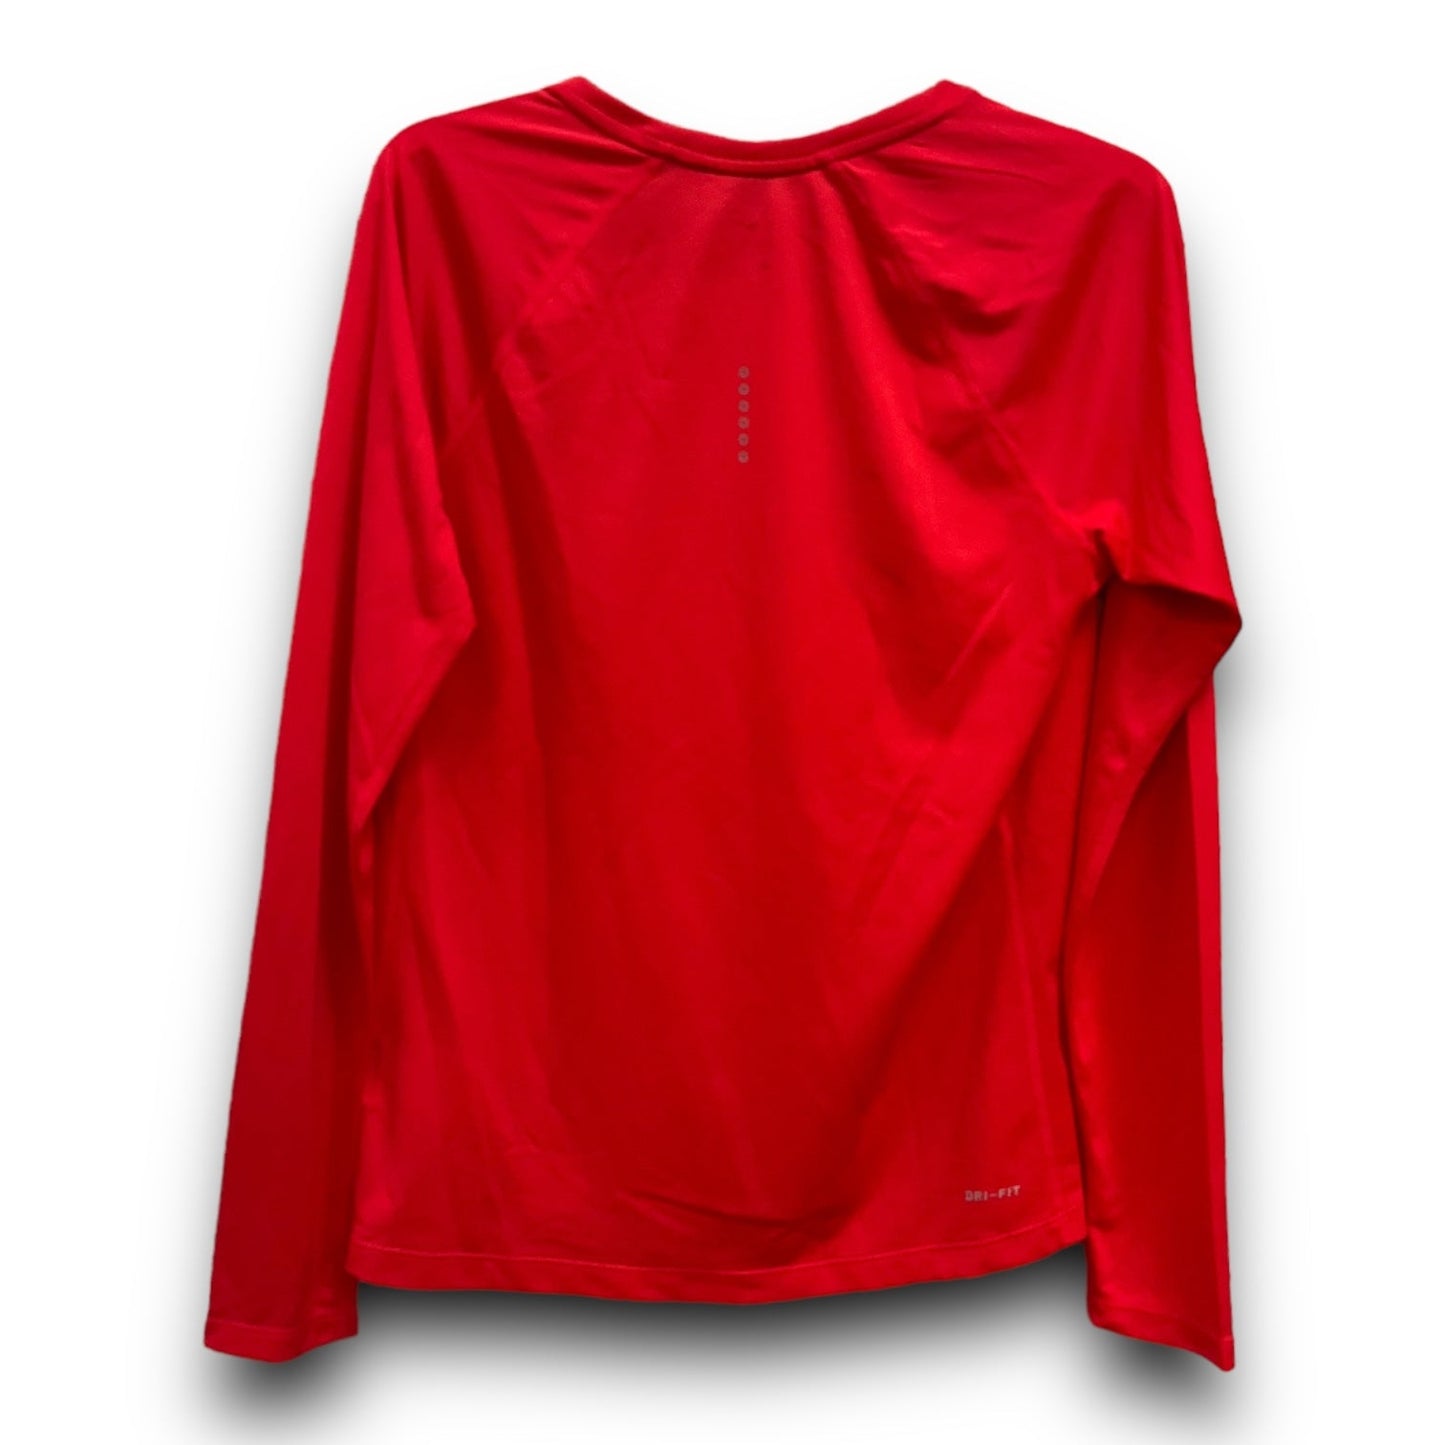 Red Athletic Top Long Sleeve Crewneck Nike Apparel, Size L